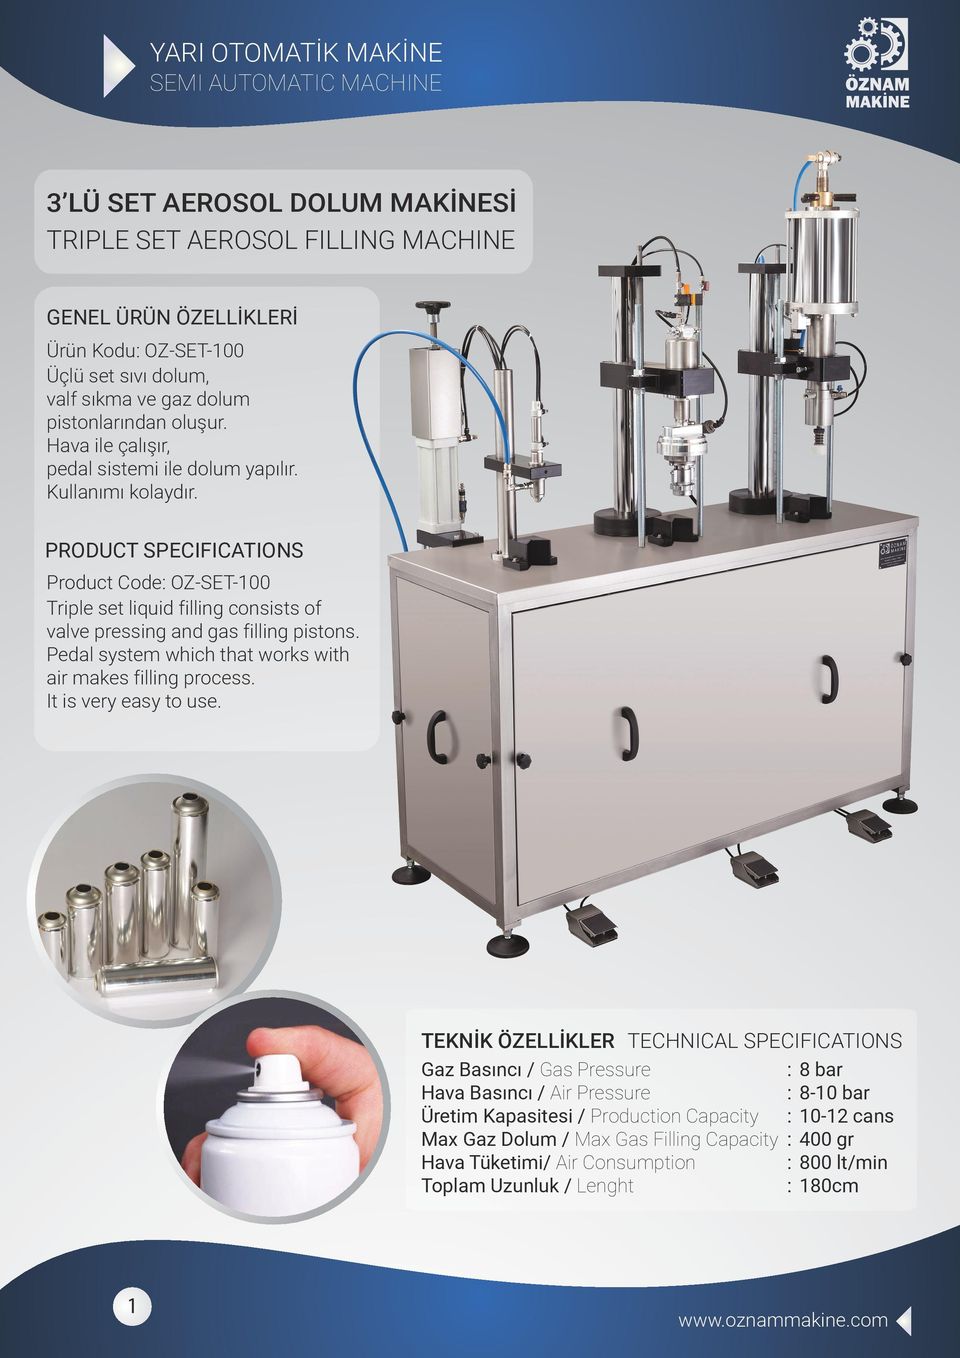 Product Code OZ-SET-100 Triple set liquid filling consists of valve pressing and gas filling pistons. Pedal system which that works with air makes filling process.